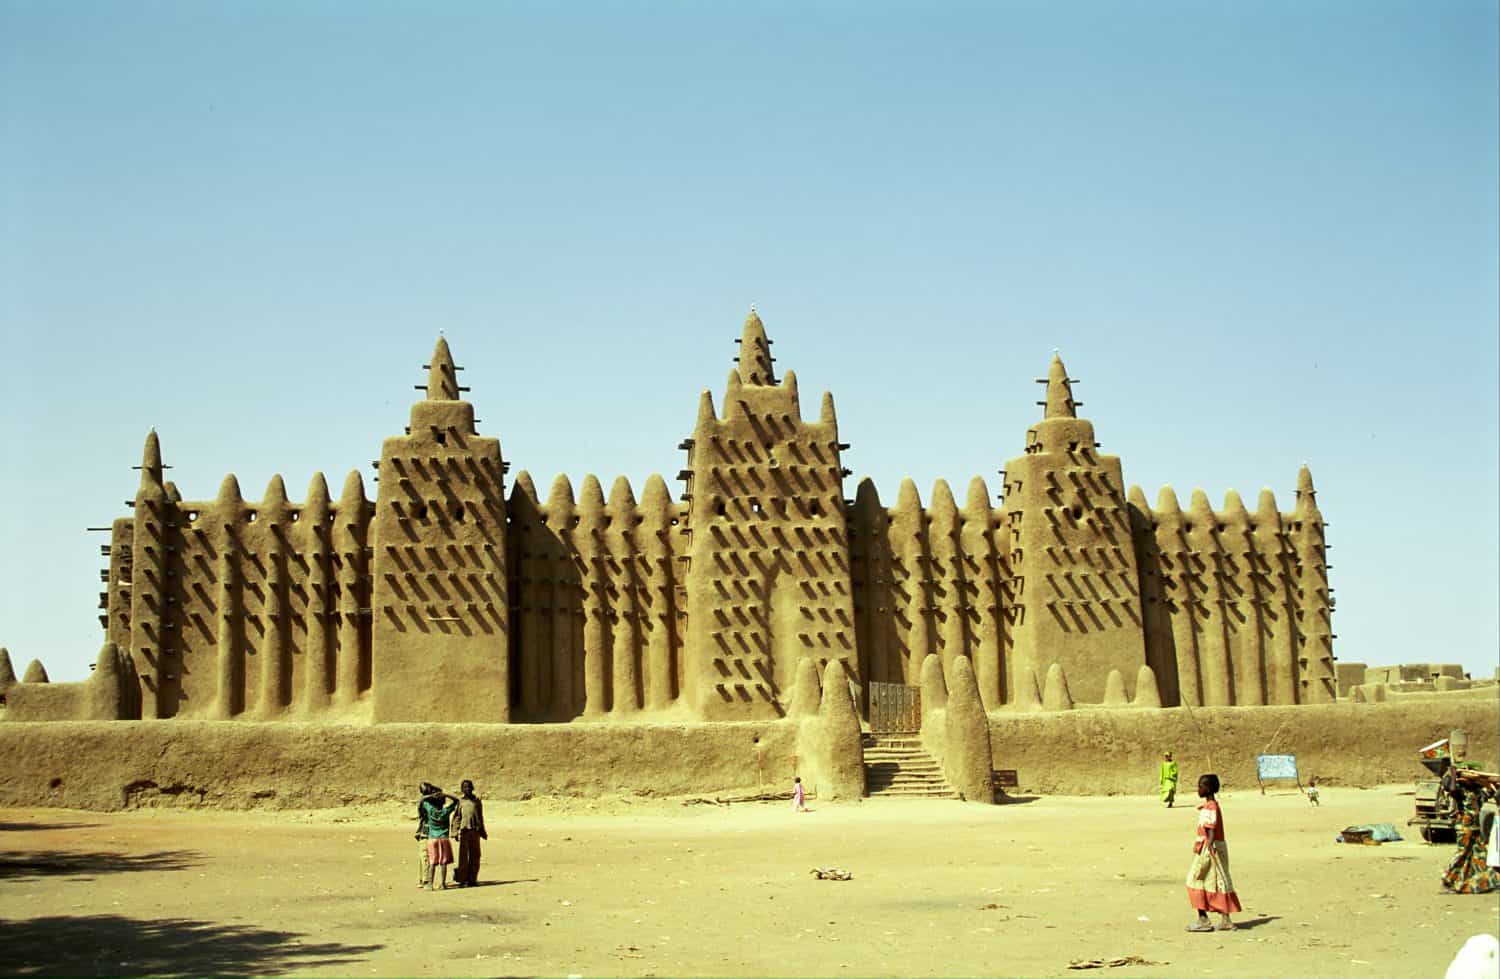 <ul> <li><strong>Location:</strong> Mali</li> <li><strong>Known For:</strong> Their rich history and architecture</li> </ul> <p>The Mosques of Timbuktu in Mali, Africa, are rich in history. Since the Mosques are part of the UNESCO World Heritage Site, some strive to conserve their integrity and structure. However, their history goes back to the 14th century, and their structure was made out of mudbricks. These factors make the remaining Mosques of Timbuktu susceptible and vulnerable to erosion, rainfall, and high temperatures.</p>